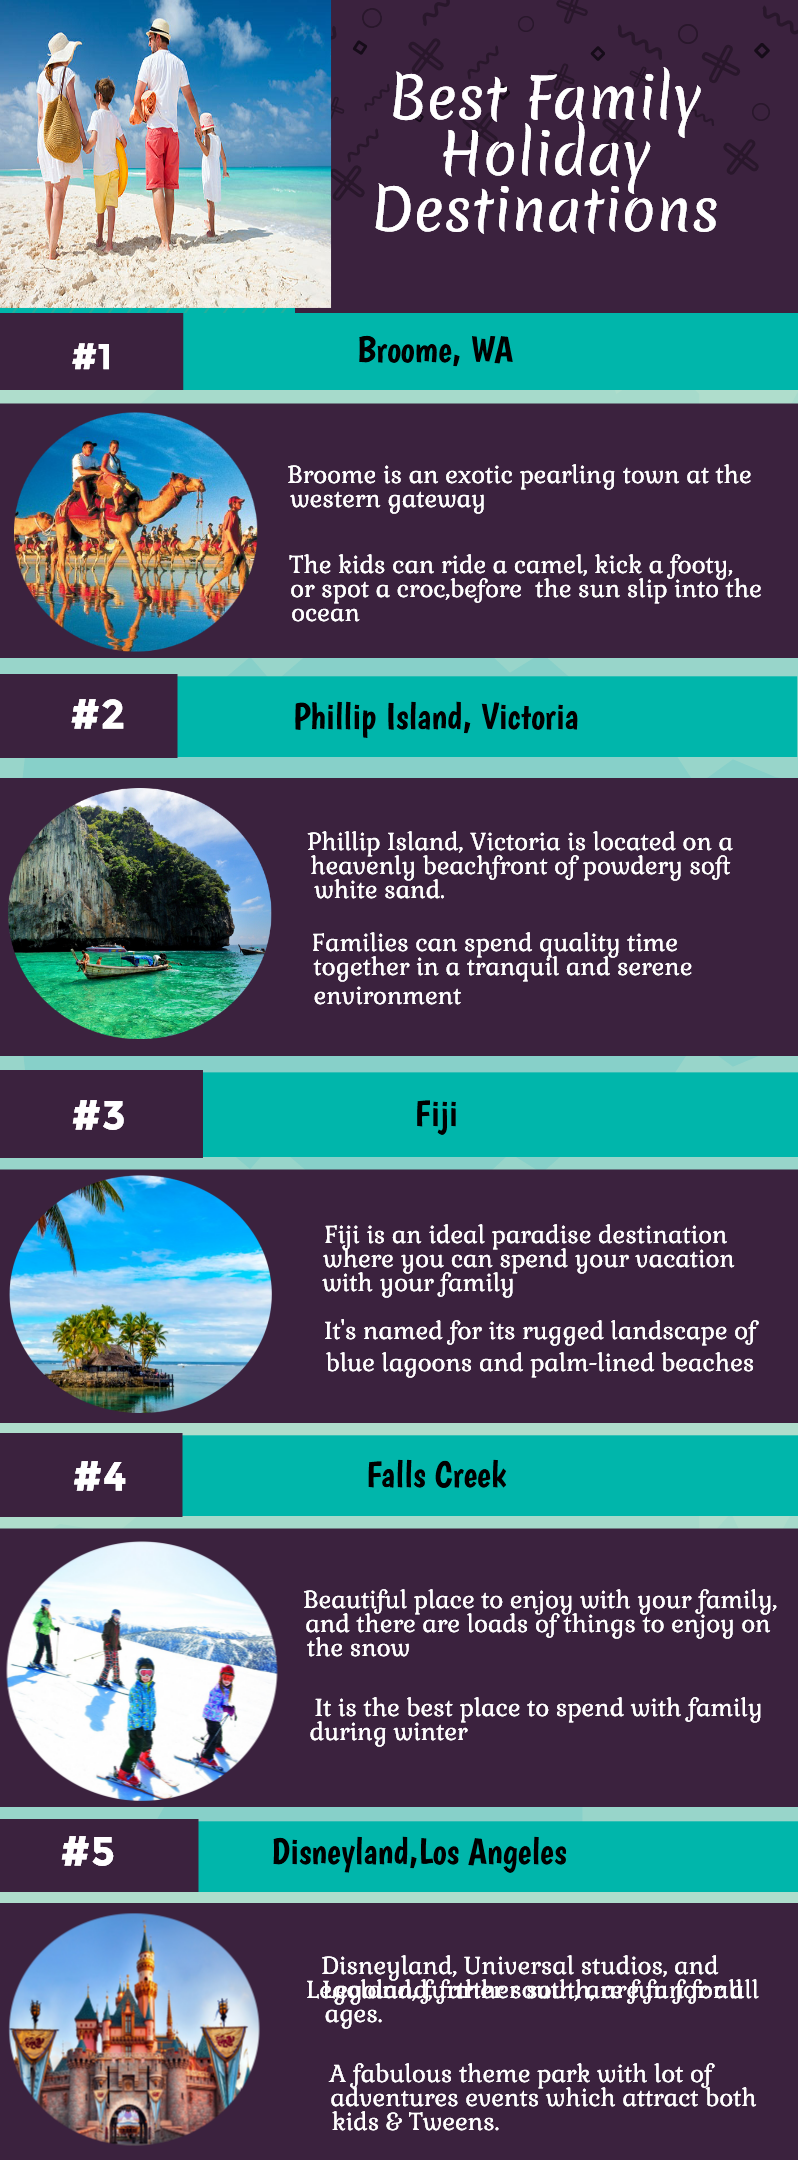 Best Family Holiday Destinations | Visual.ly